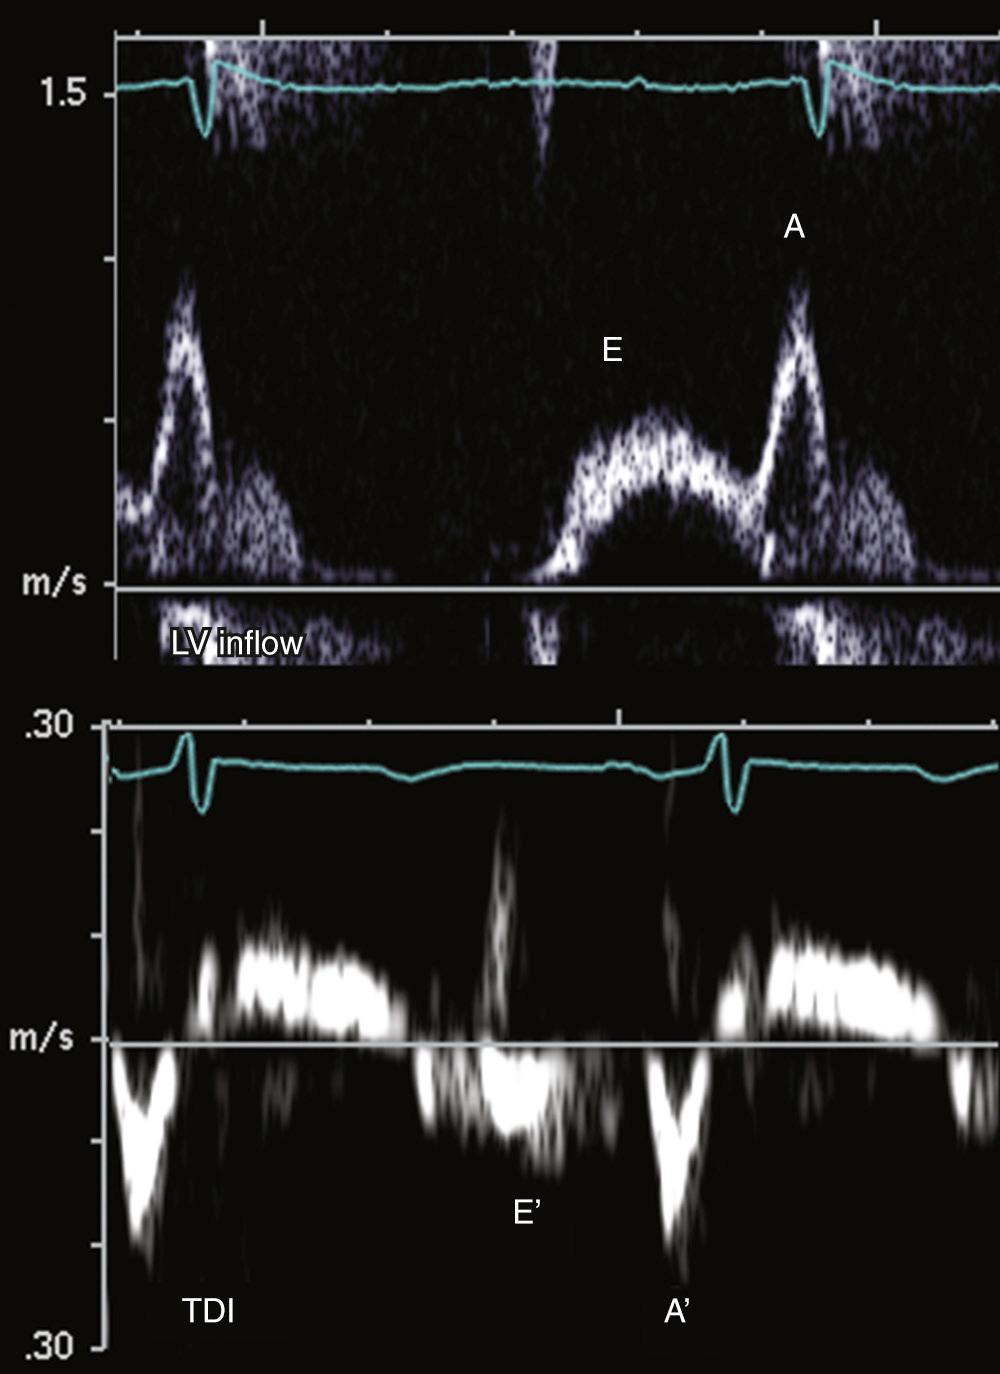 FIGURE 55-20, Doppler indices for mild diastolic function. With impaired ventricular relaxation, peak early mitral inflow velocity is decreased. Increased reliance on atrial contribution to ventricular filling leads to reversal of the E : A ratio on the left ventricular (LV) inflow tracing. A ratio of LV inflow E wave to tissue Doppler velocity (TDI) E' wave (E:E' ratio) less than 8 implies normal left atrial pressure. In this case, E:E' = 0.6/0.1 = 6.